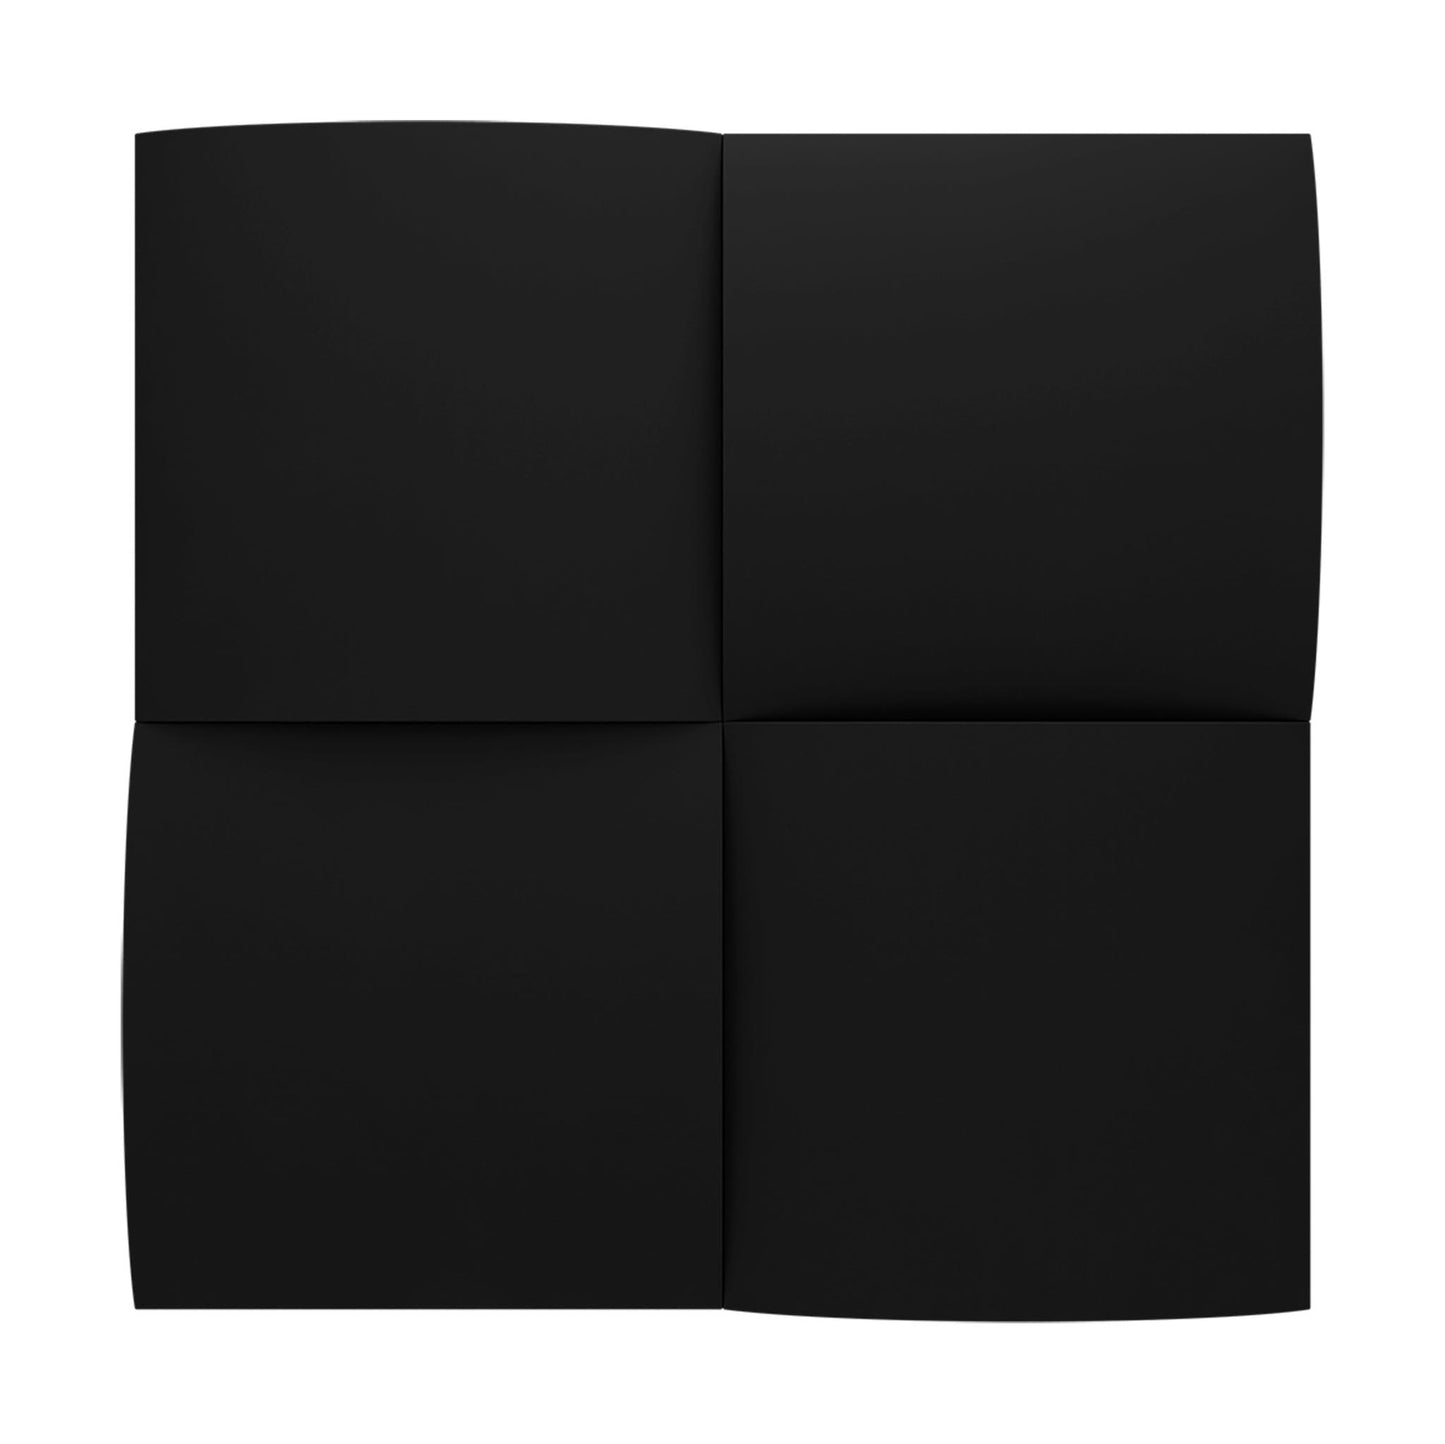 Vicoustic Cinema Round Premium Wall & Ceiling Absorption Acoustic Panel (Pack of 8)